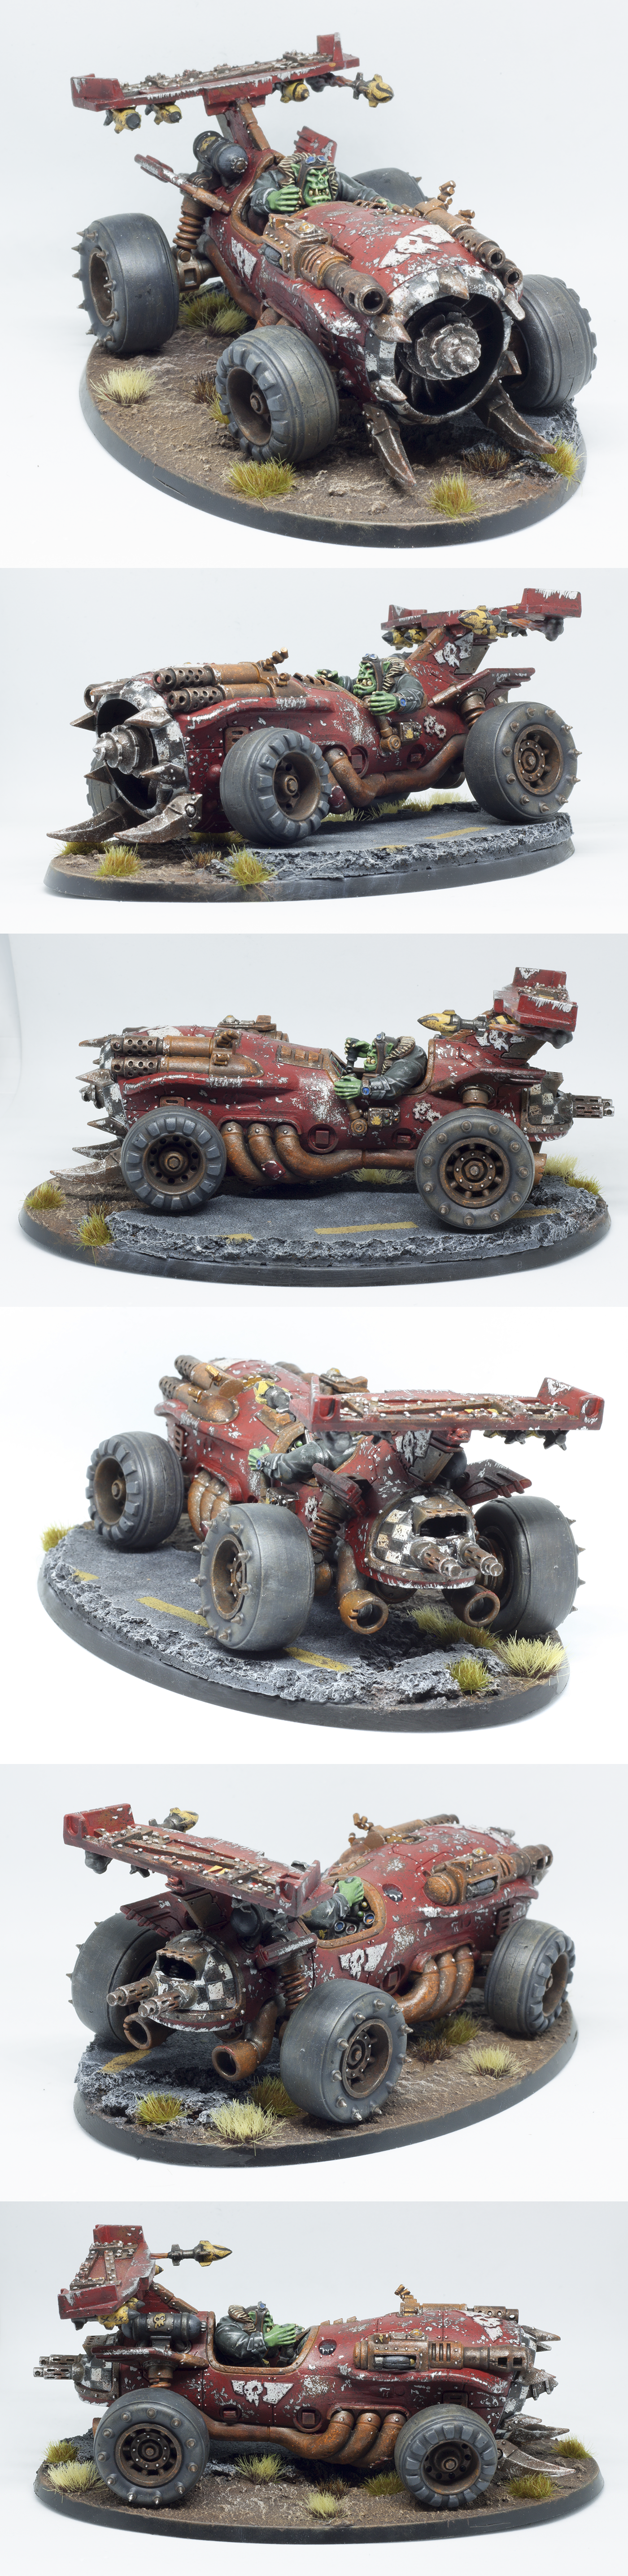 Asphalt, Battle Damage, Cars, Checkers, Chipping, Evil Sunz, Fast Attack, Orks, Red, Road, Rust, Speed, Vehicle, Waaagh, Warhammer 40,000, Weathered